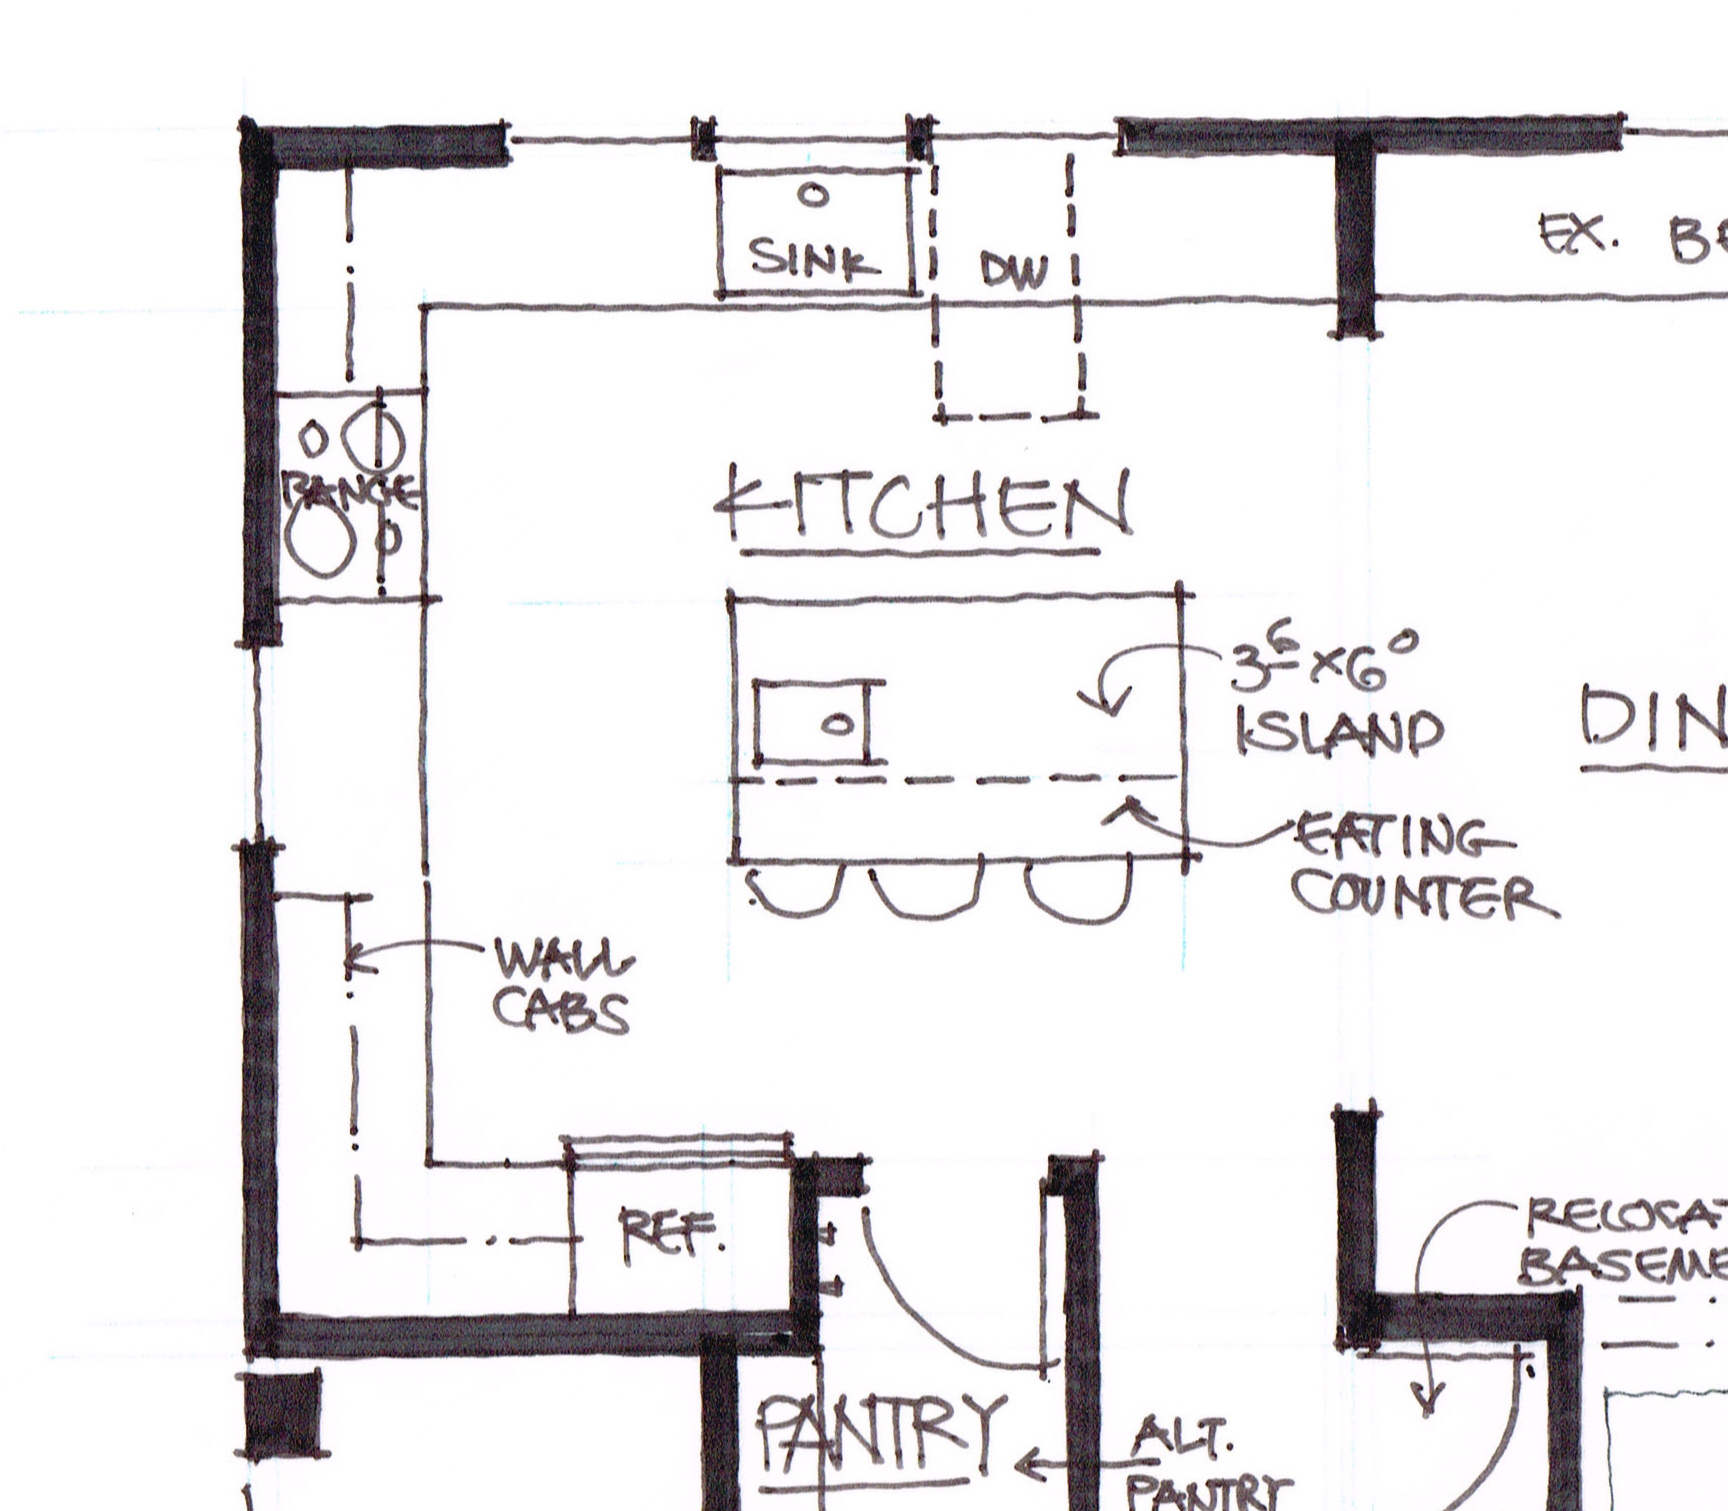 Plan B is a more open design between the kitchen and dining room with 